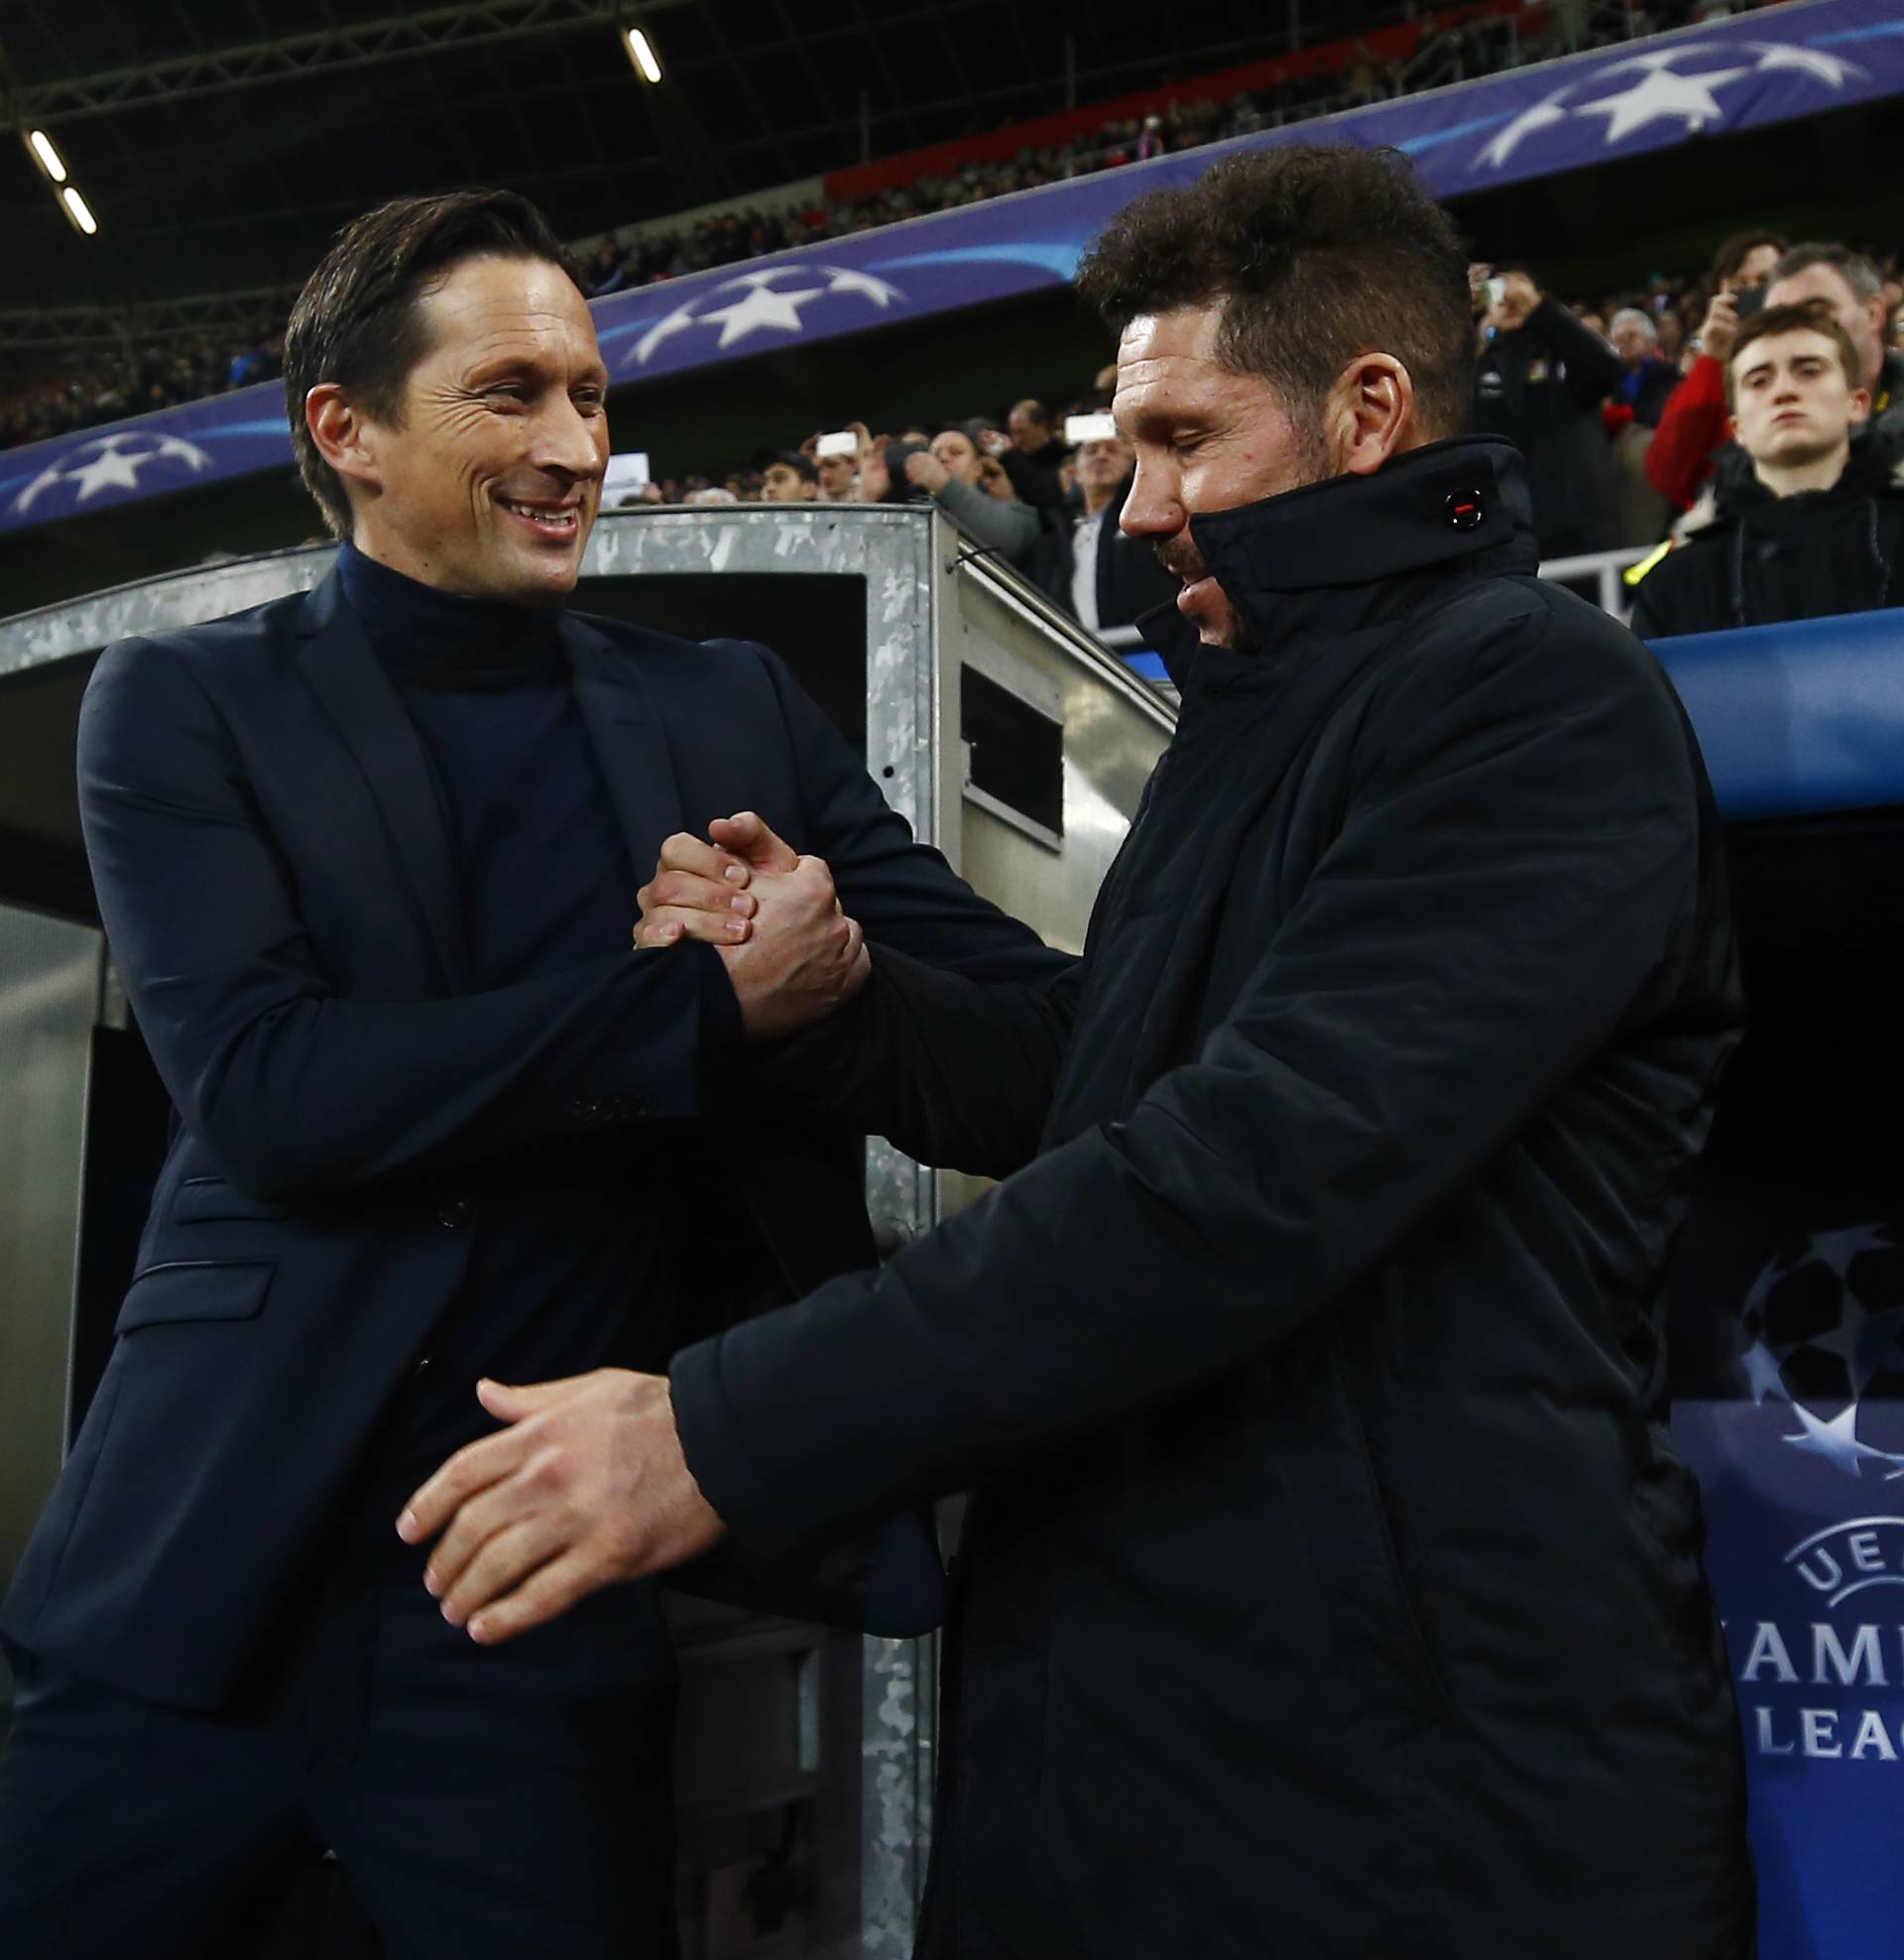 Bayer Leverkusen coach Roger Schmidt greets Atletico Madrid coach Diego Simeone before the match